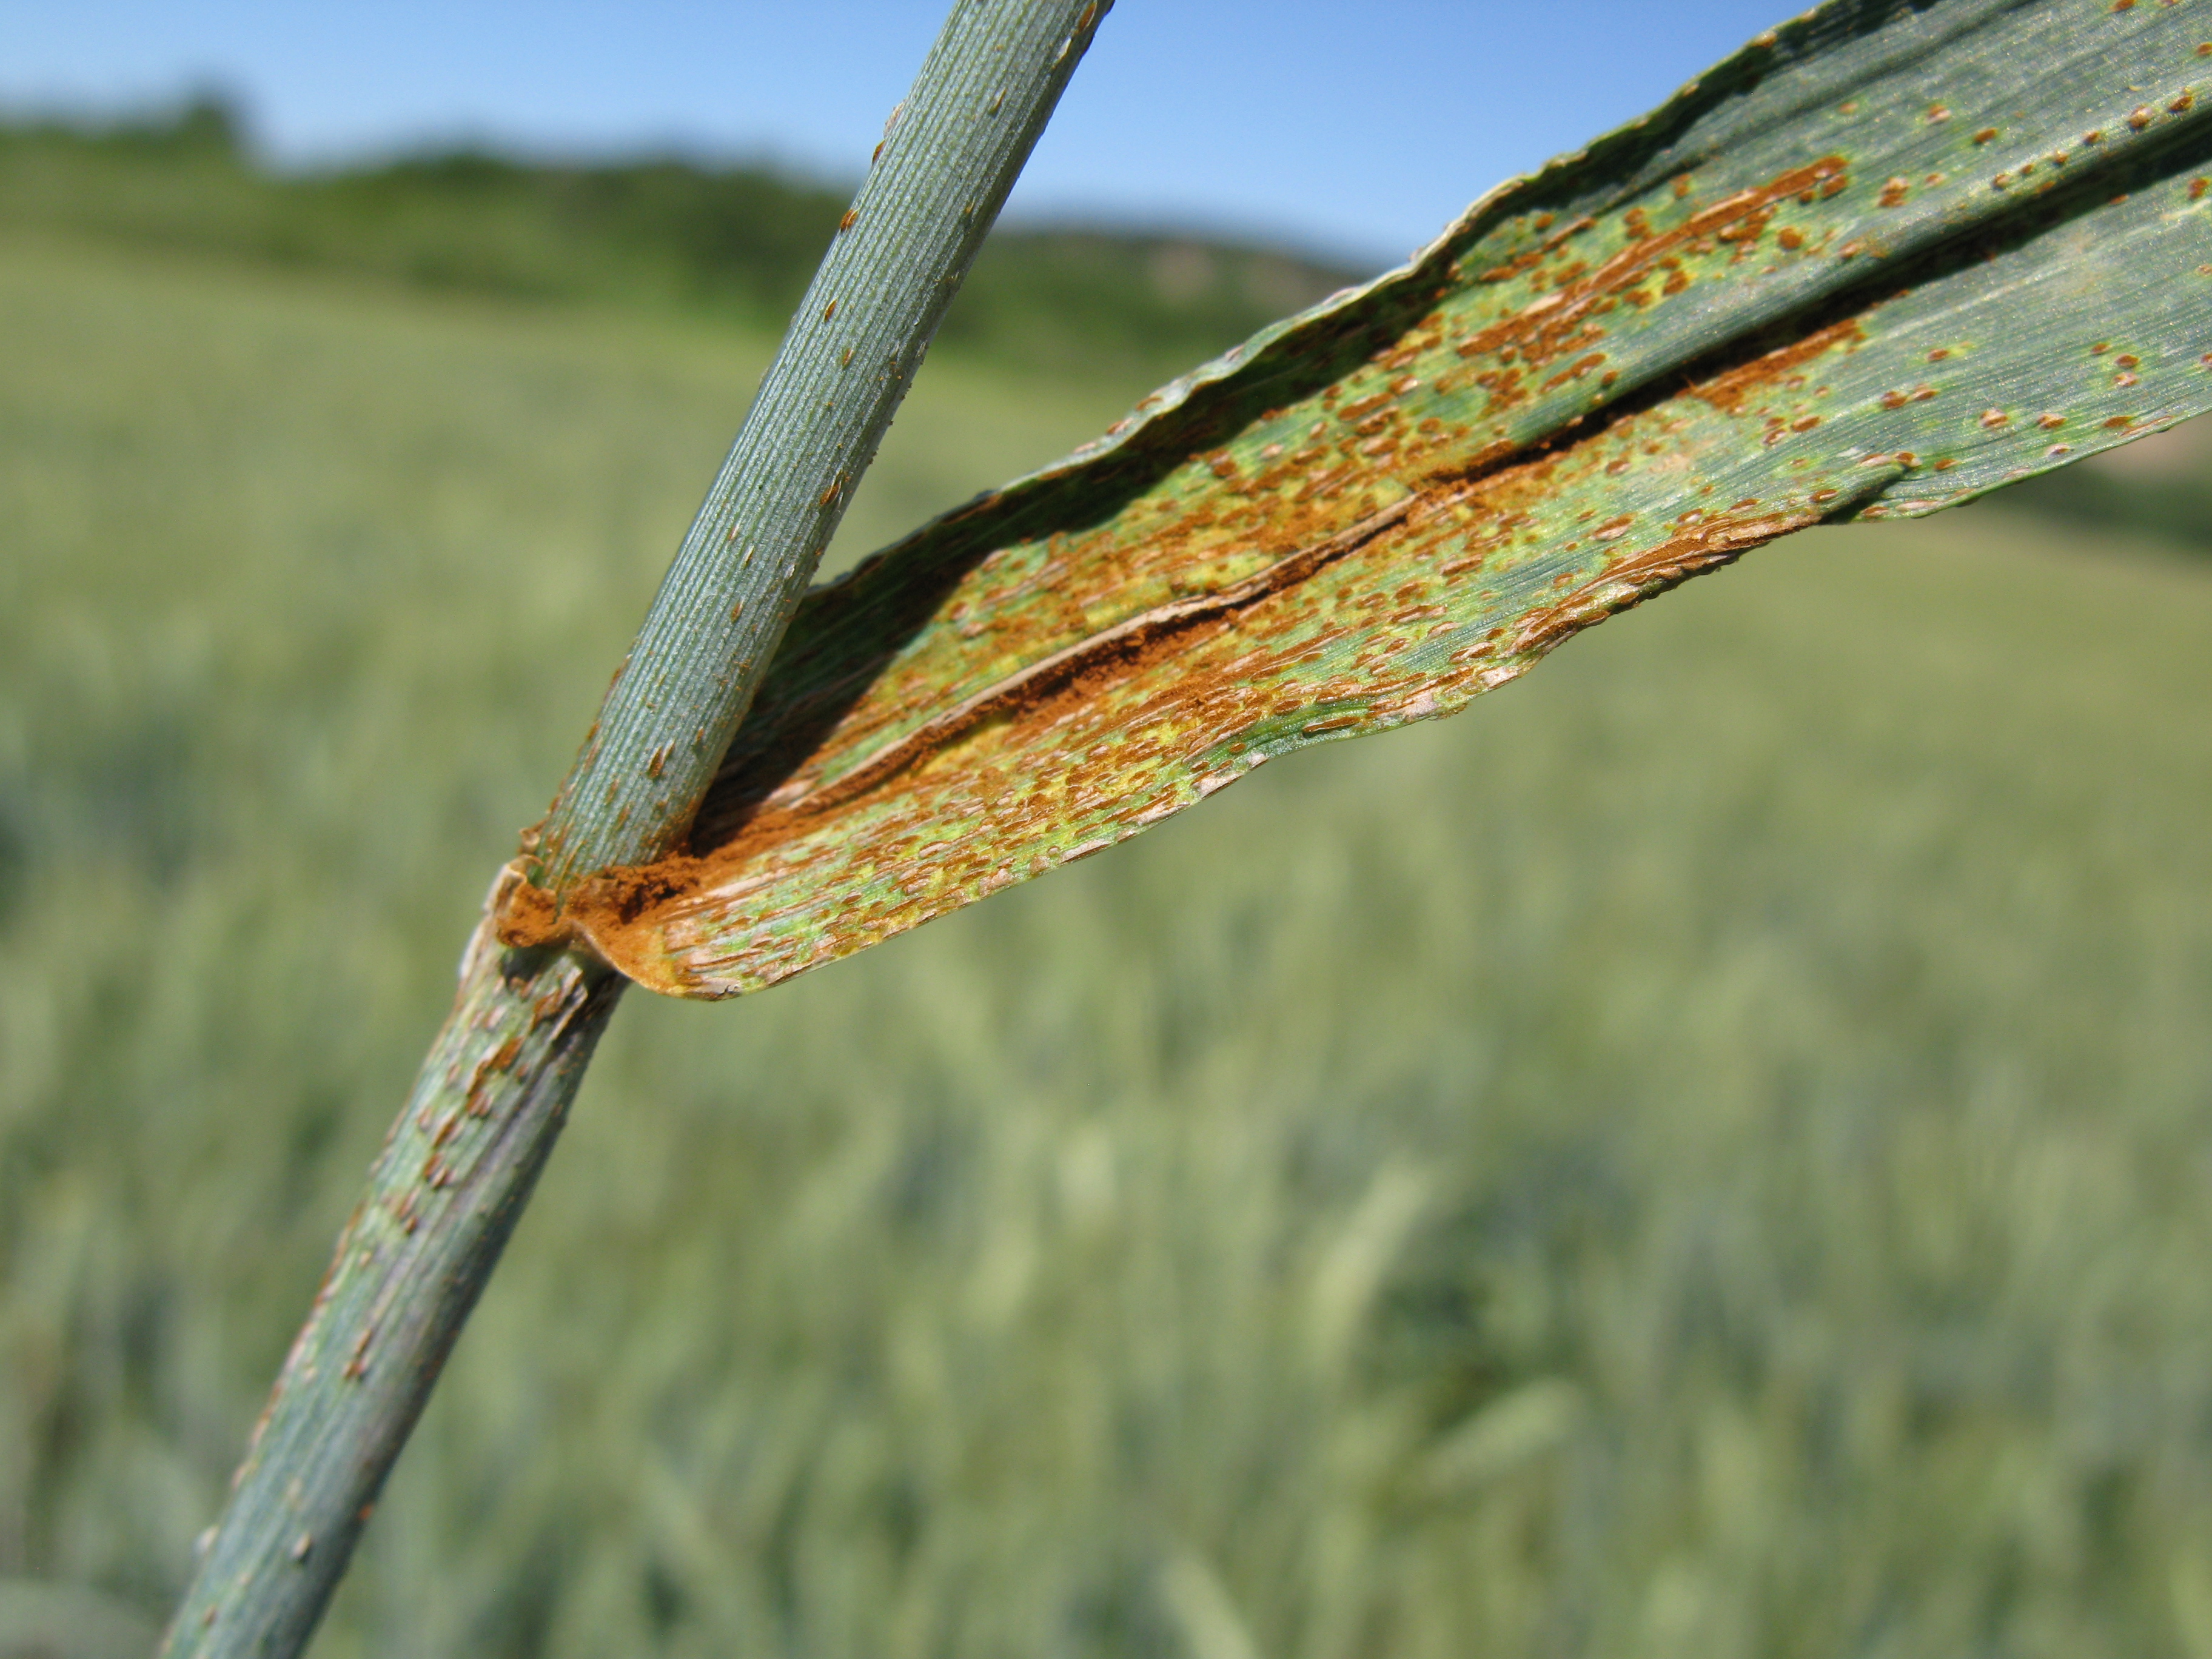 Pustules containing red to orange spores erupt from stem and leaf tissue.